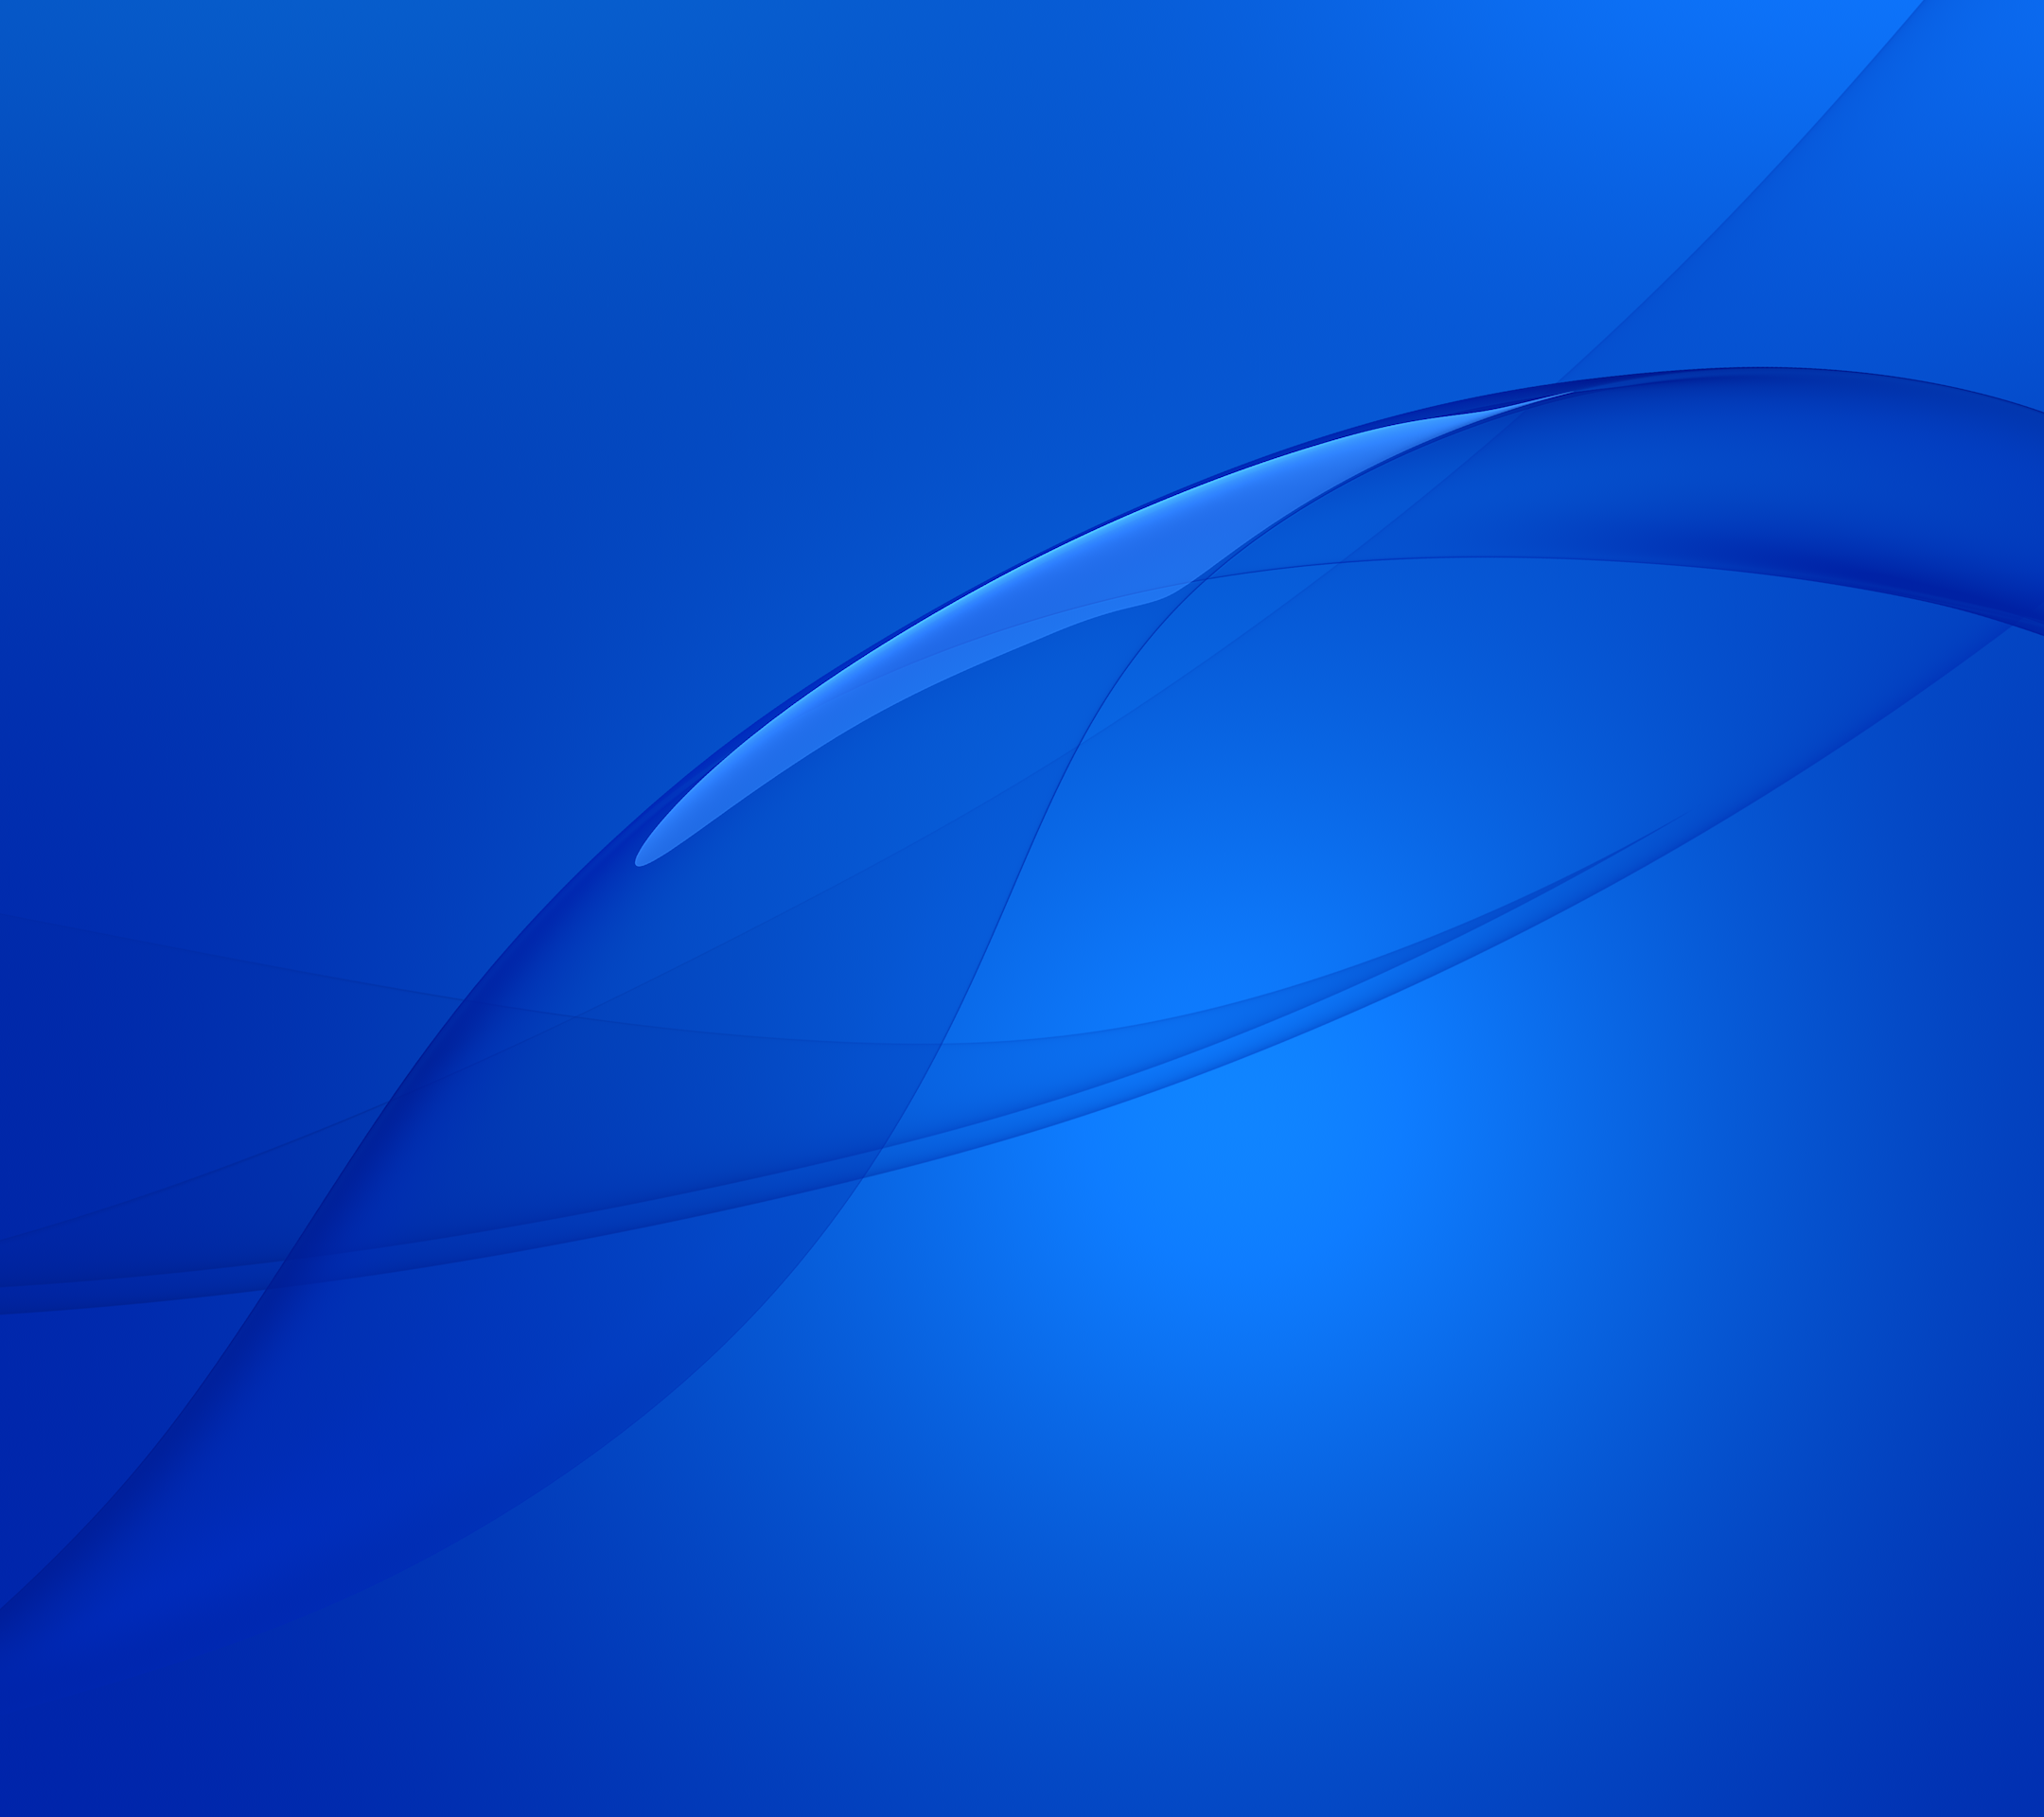 Sony Xperia Z3 wallpapers available for download | TalkAndroid.com